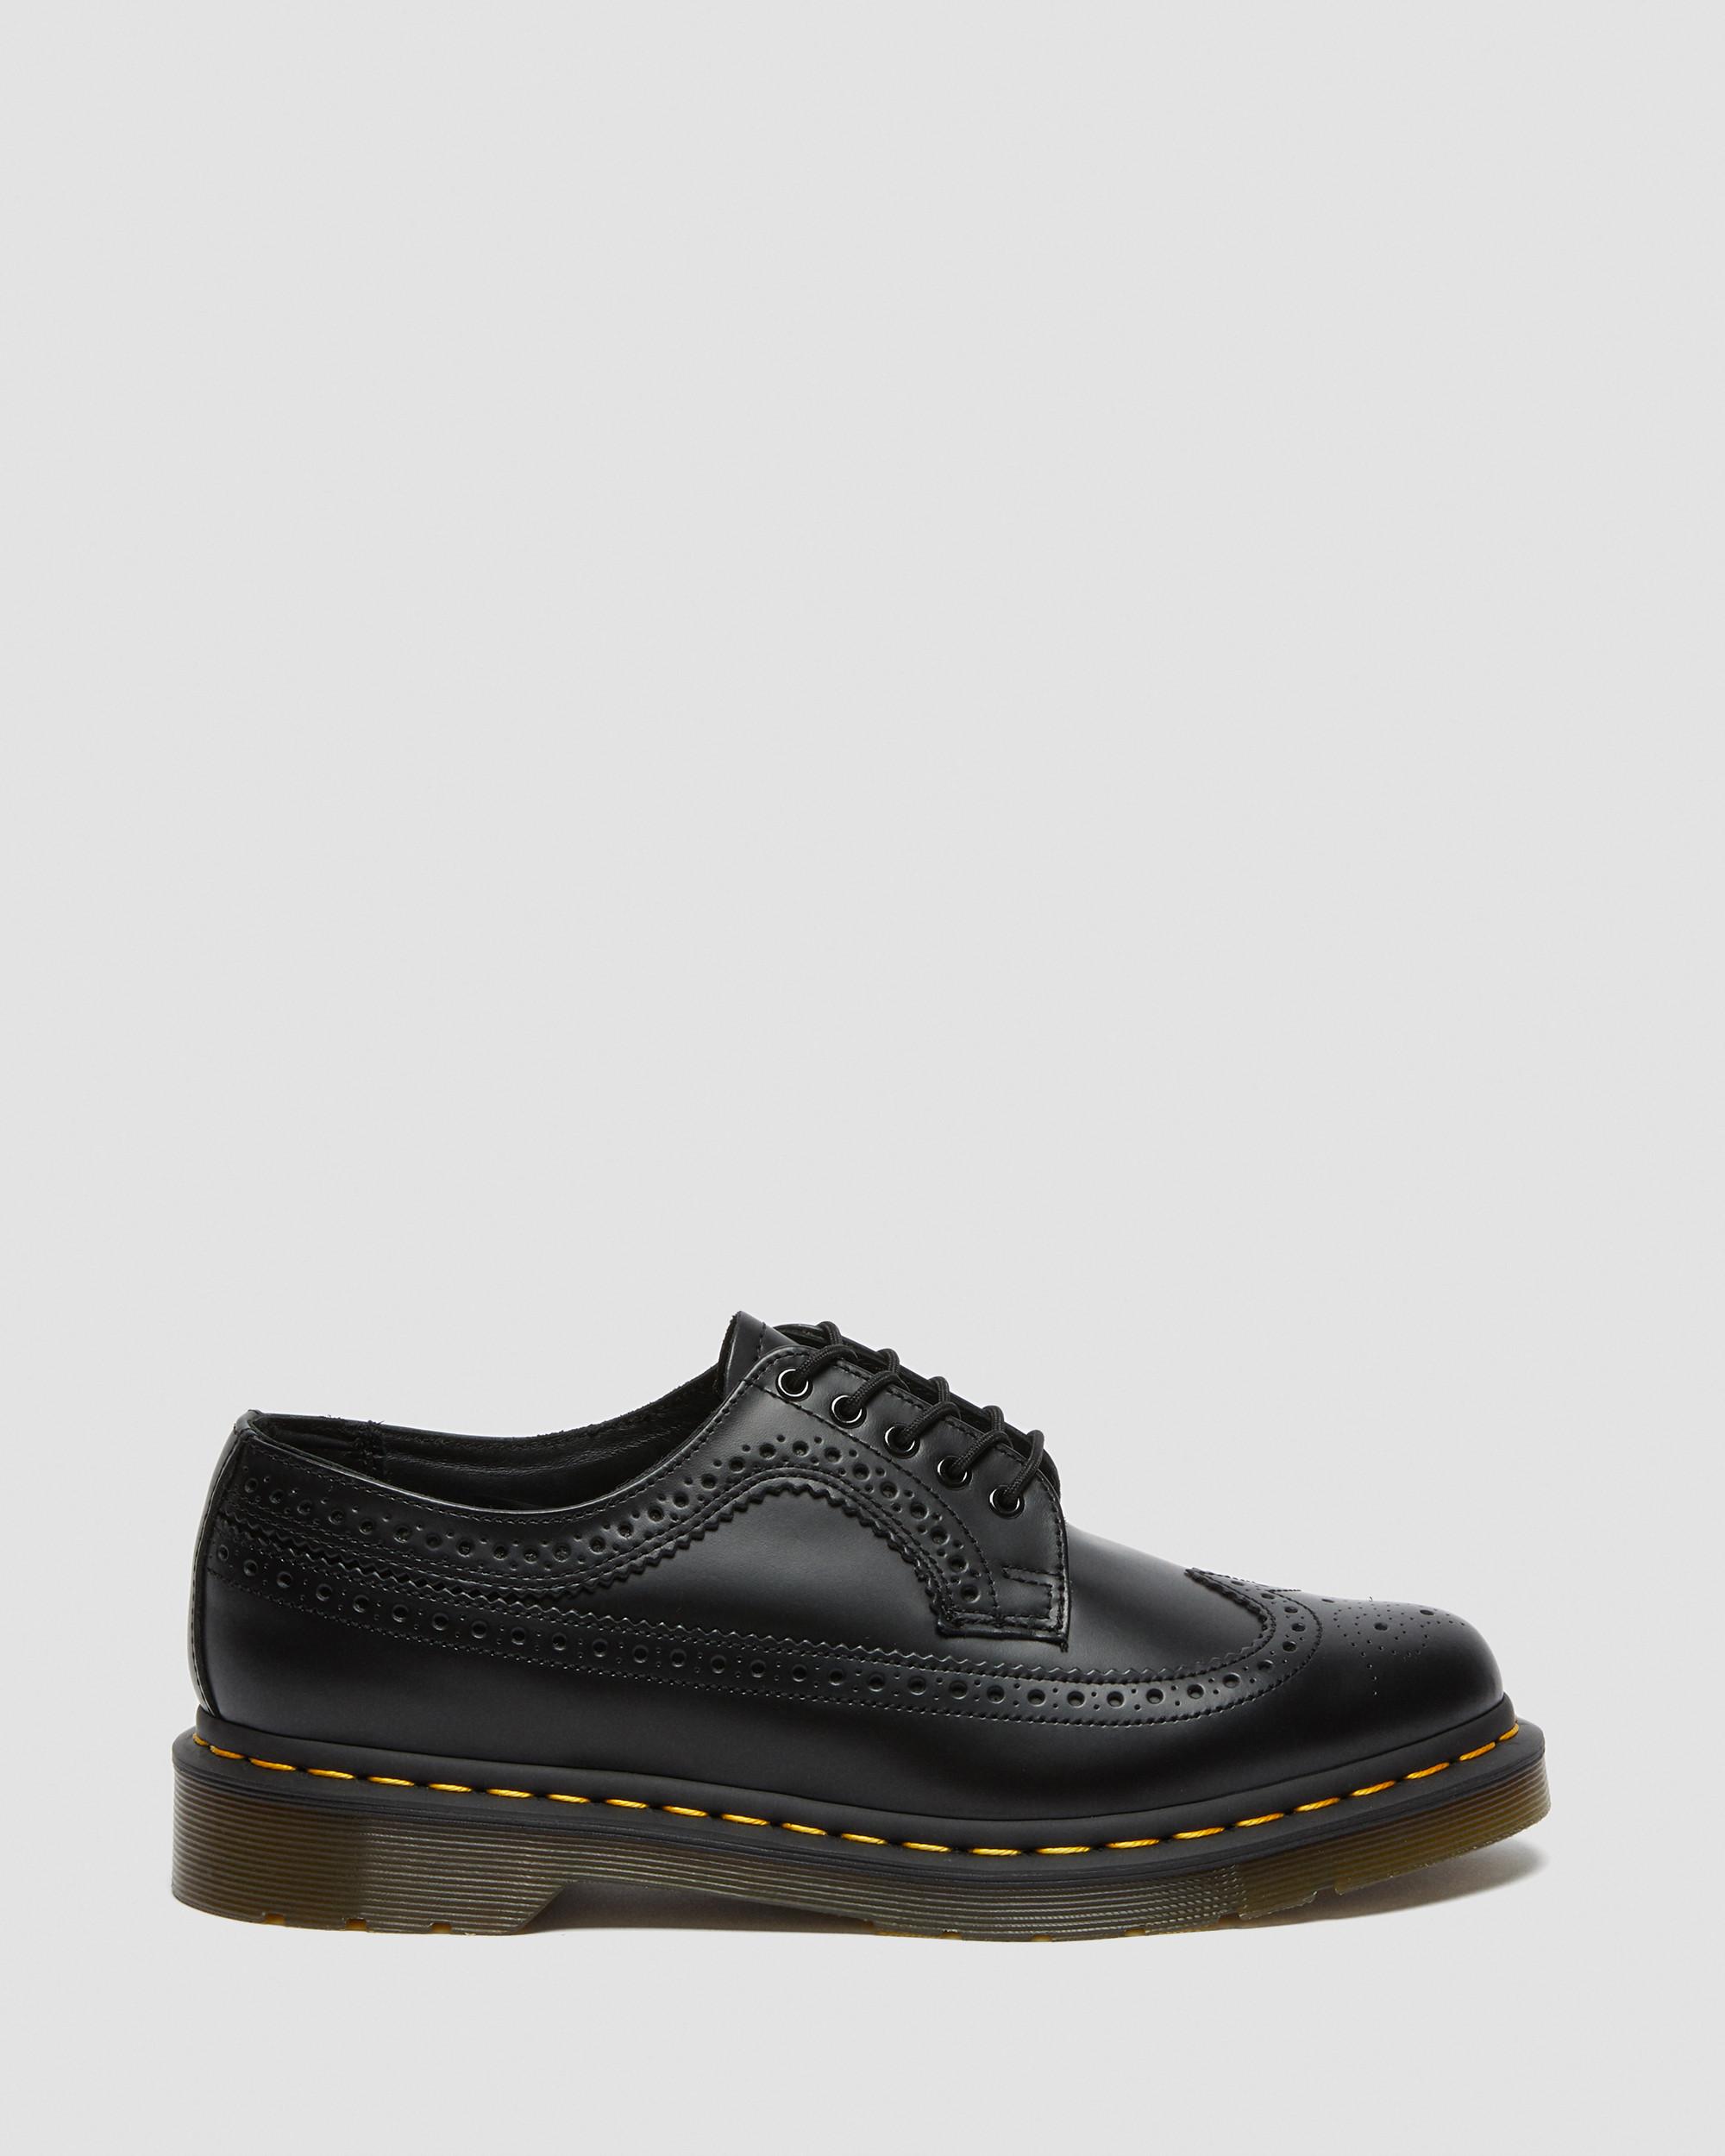 Dr.Martens 3989 5-Eyelet Black Mens Brogue Oxford Shoes Smooth Leather